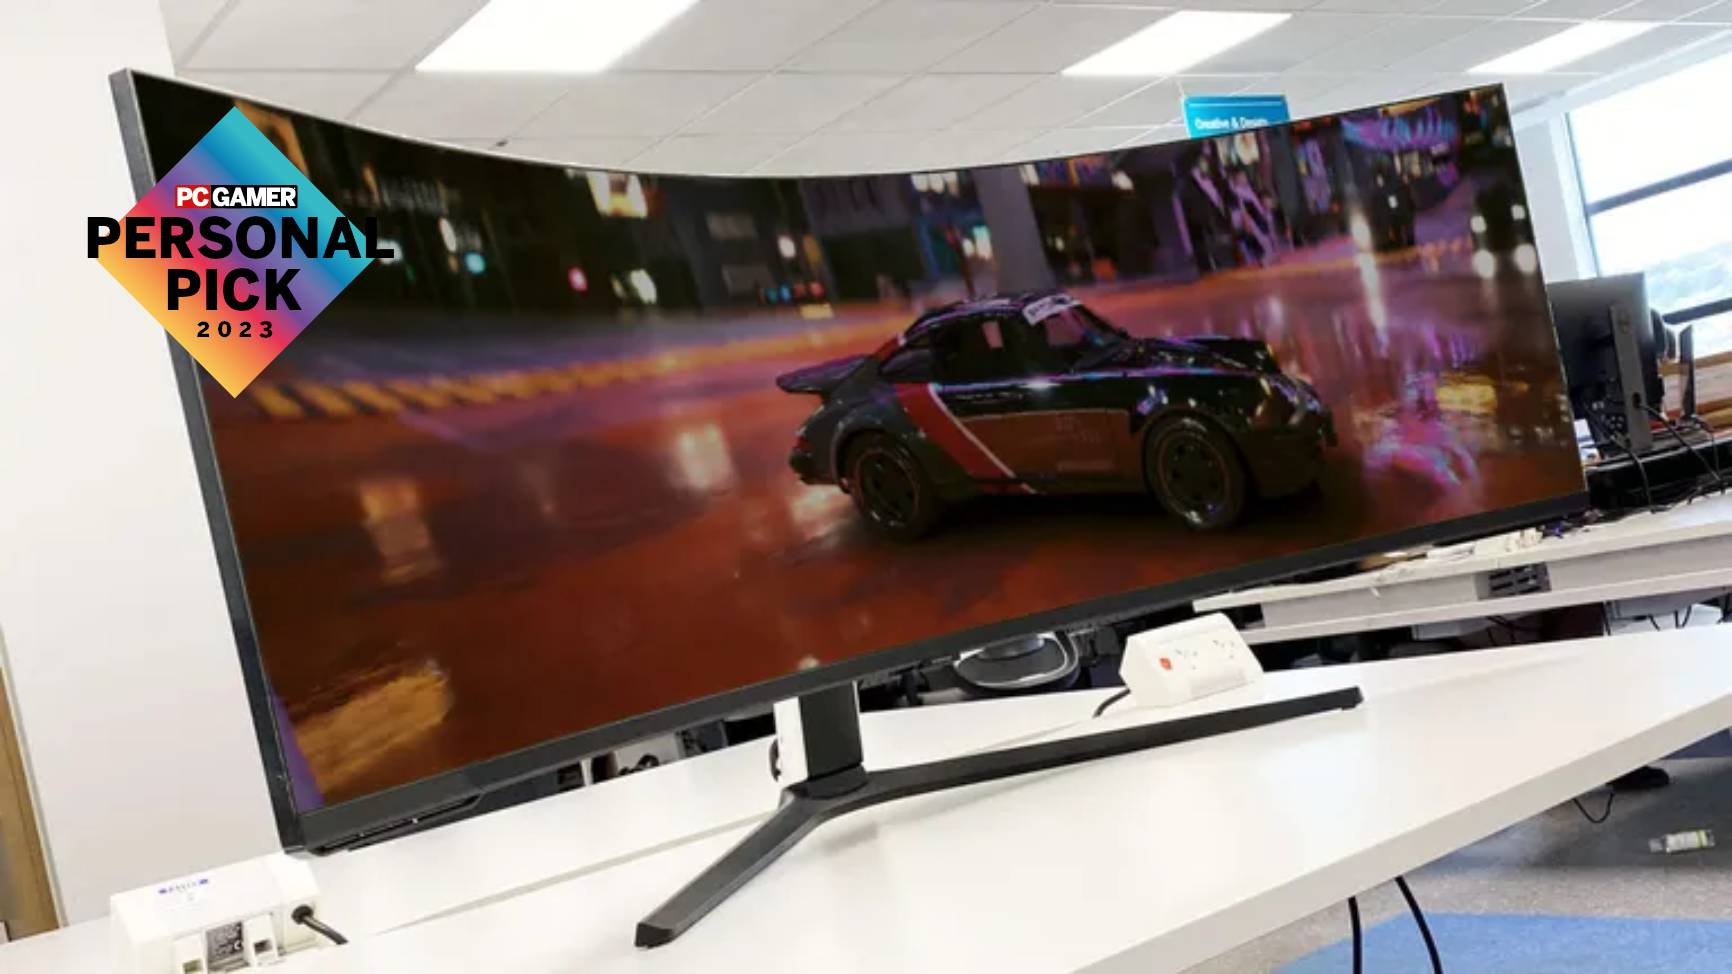 Save $500 on this ultra-fast 240Hz 4K Samsung mini-LED monitor